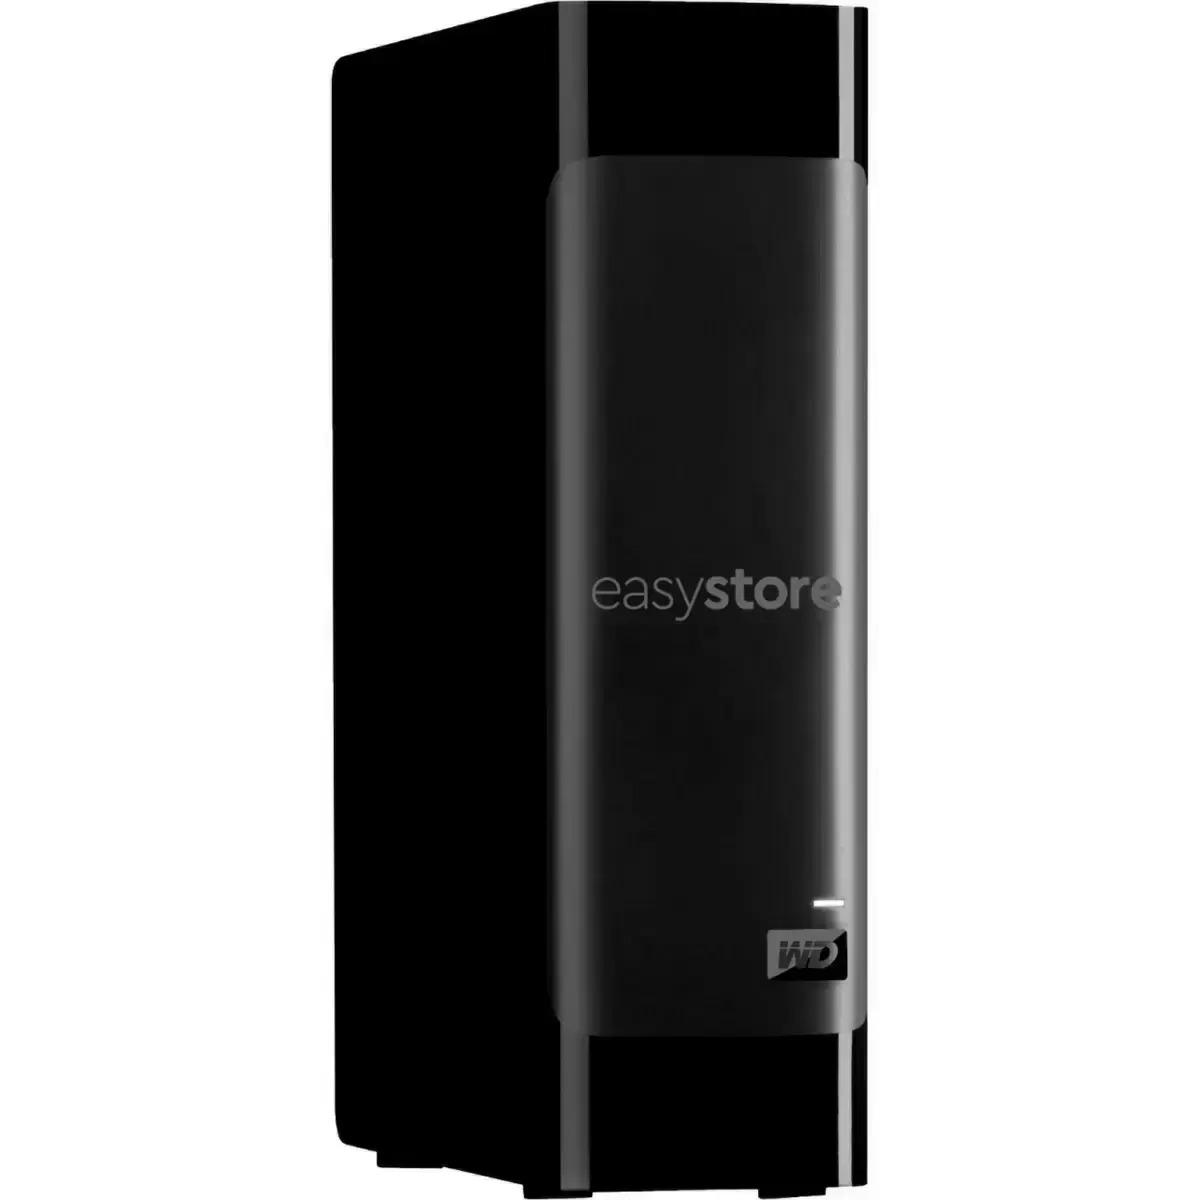 14TB WD easystore External USB 3.0 Hard Drive for $199.99 Shipped